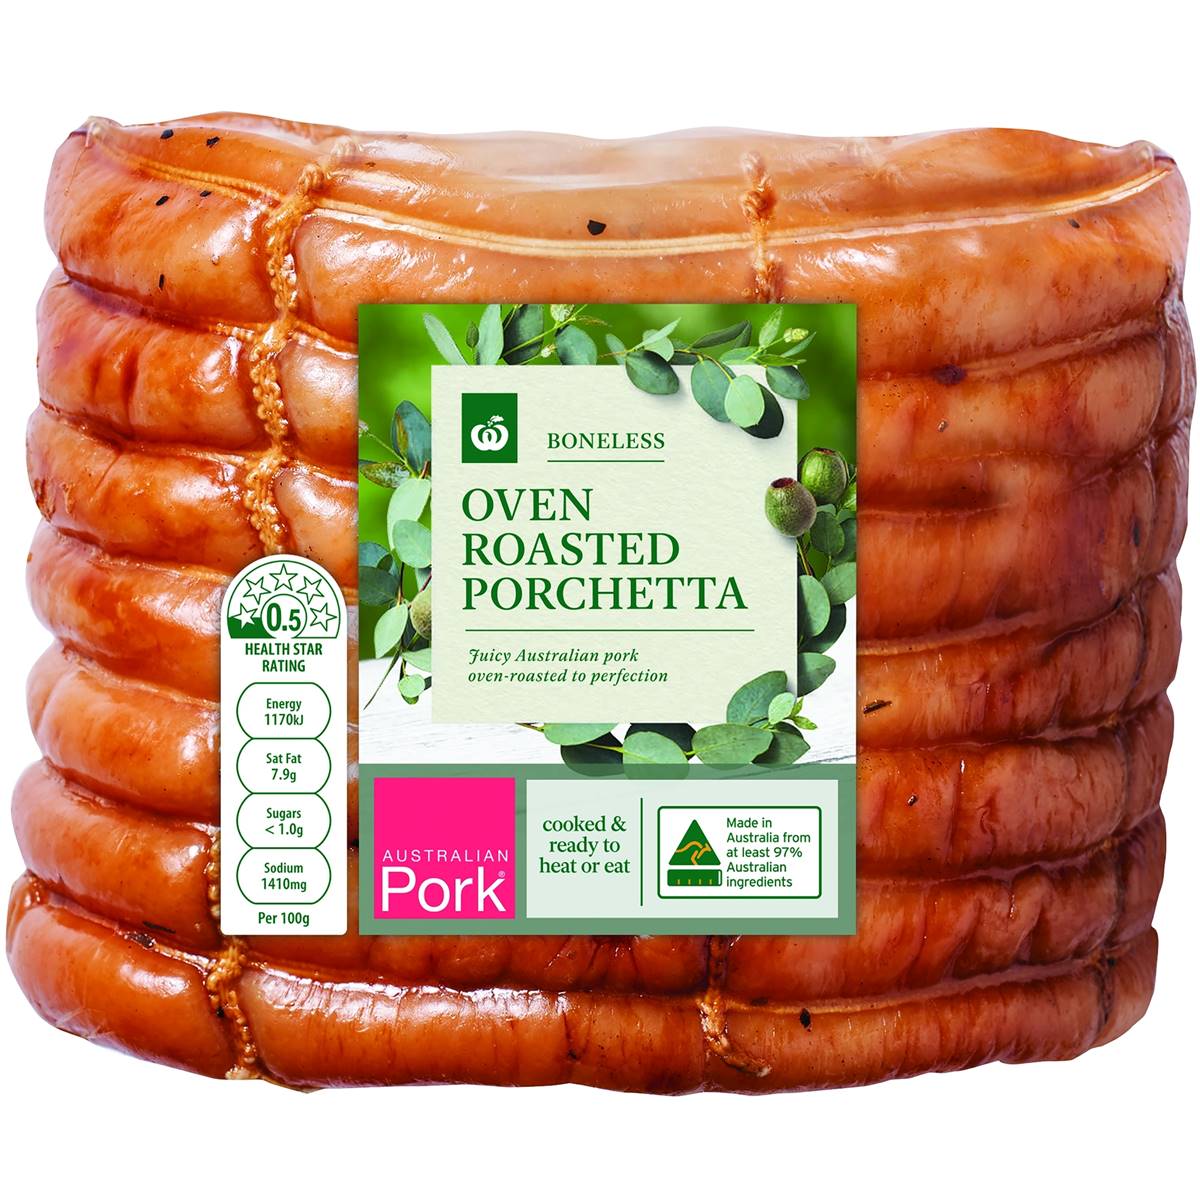 Calories in Woolworths Oven Roasted Porchetta